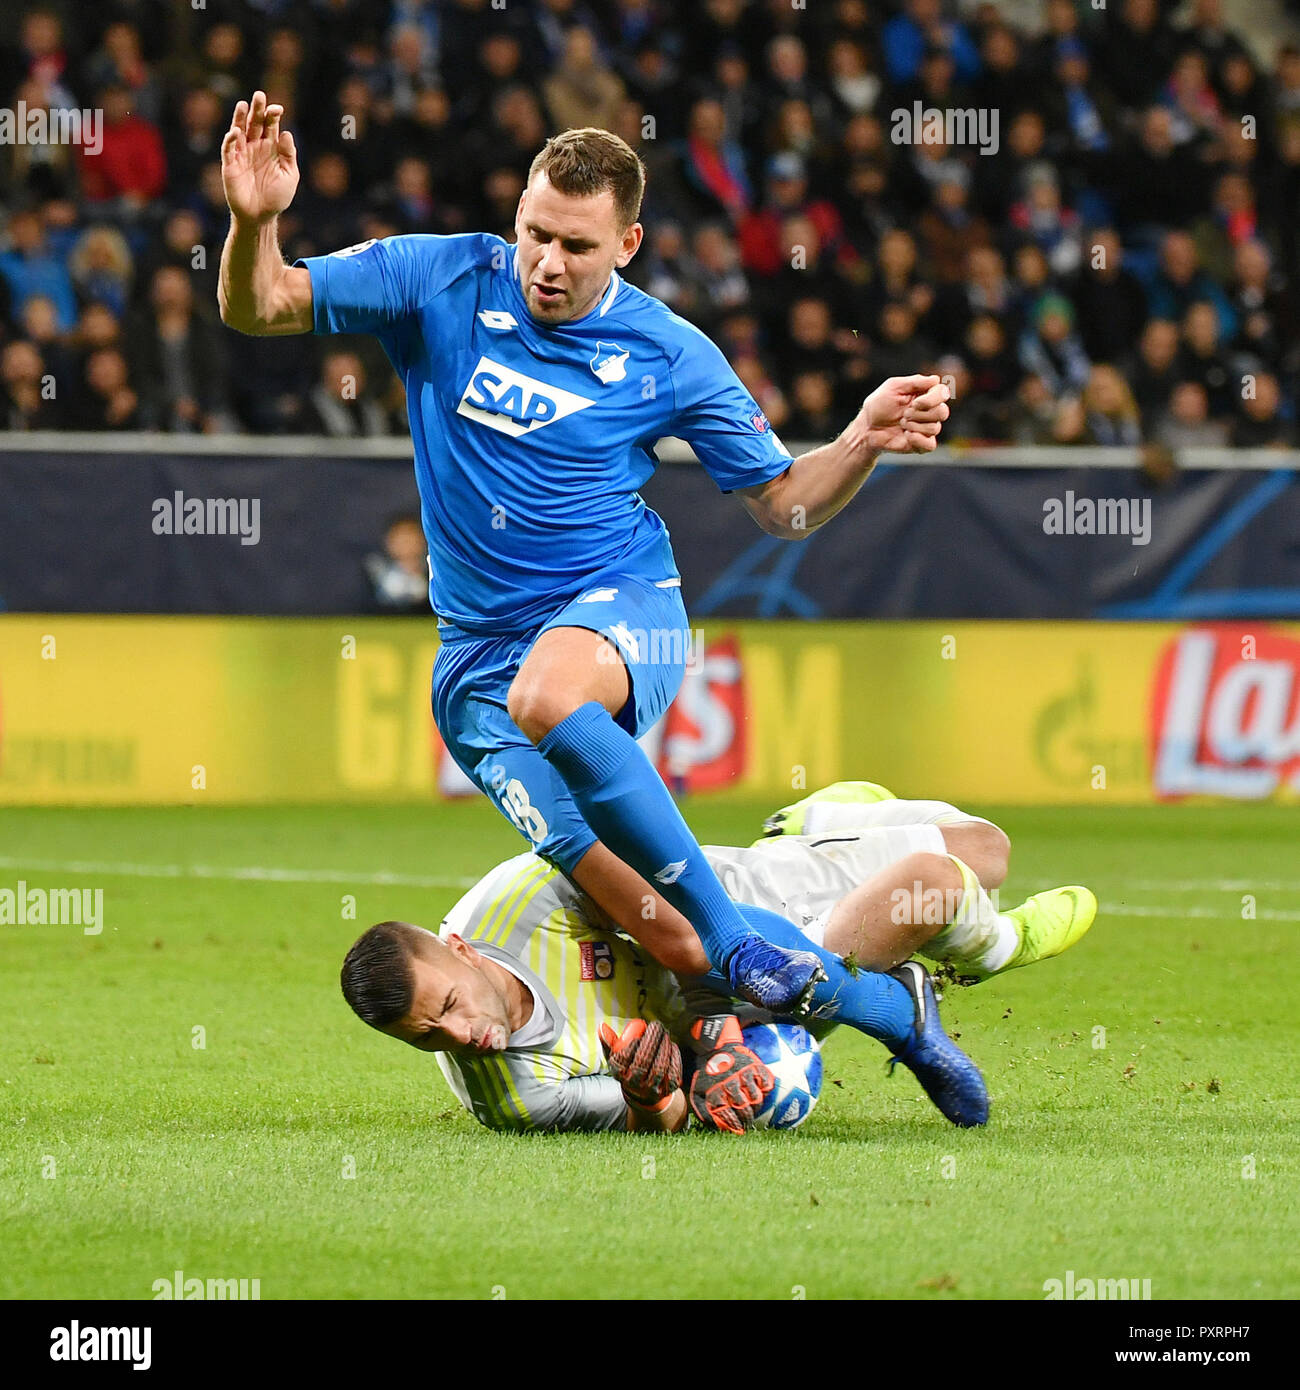 Hoffenheim, Germany. 23rd Oct, 2018. Anthony Lopes (Bottom), goalkeeper of Lyon fights for the ball during the UEFA Champions League group F match between Hoffenheim and Lyon at Rhein-Neckar-Arena in Sinsheim, Germany, on Oct. 23, 2018. The match ended 3-3. Credit: Ulrich Hufnagel/Xinhua/Alamy Live News Stock Photo